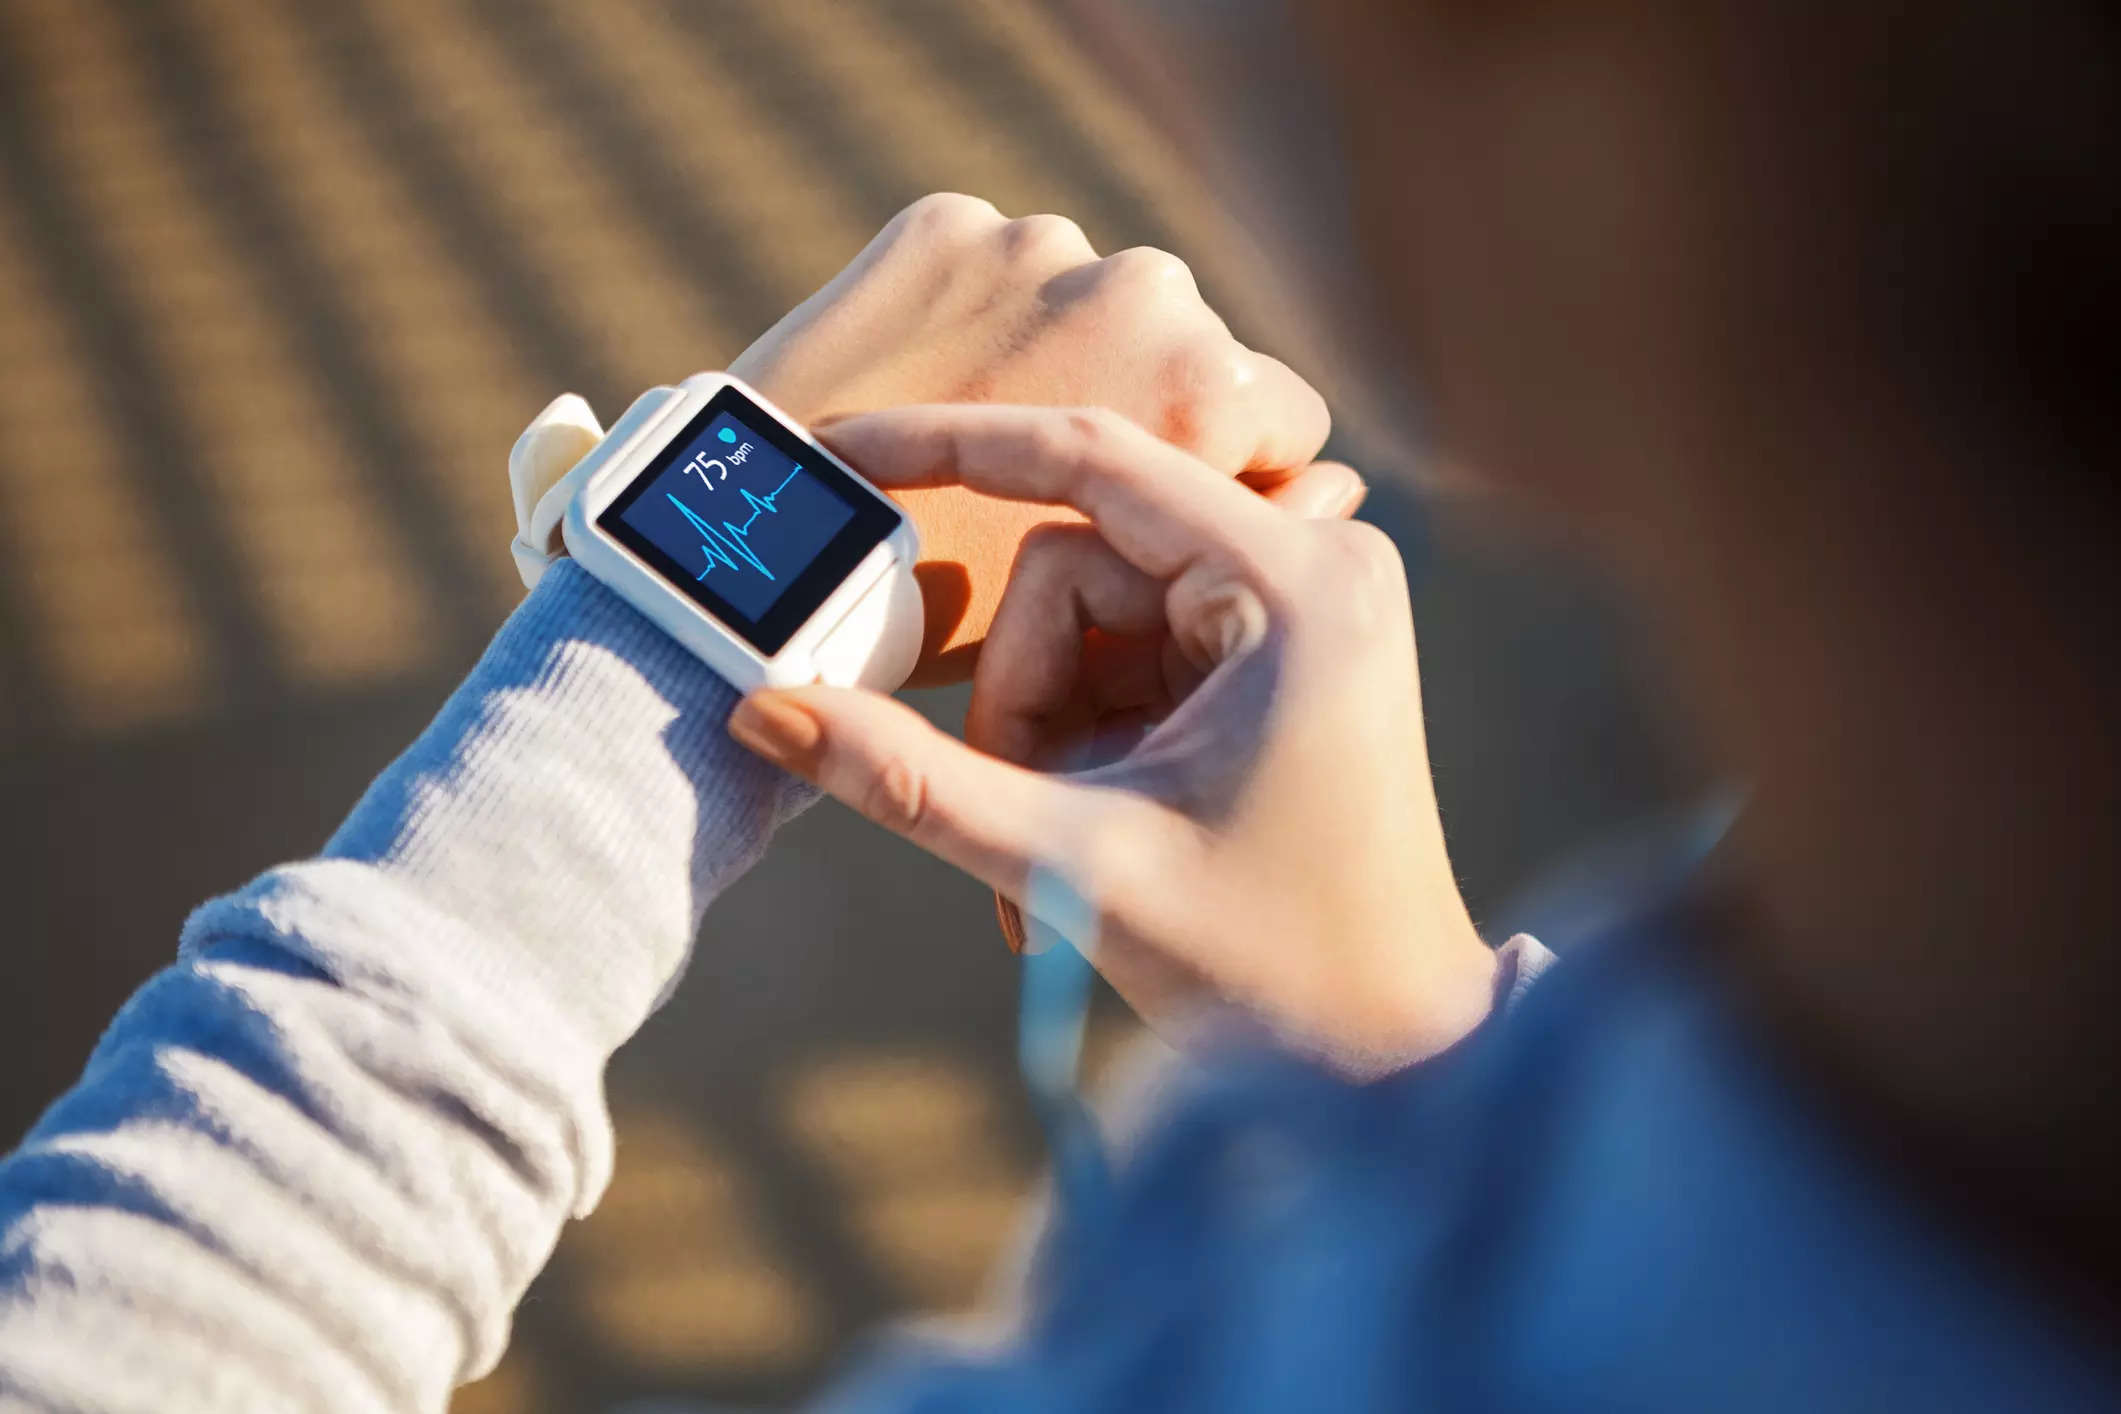 Smartwatches could help detect and track COVID - here's what the research shows